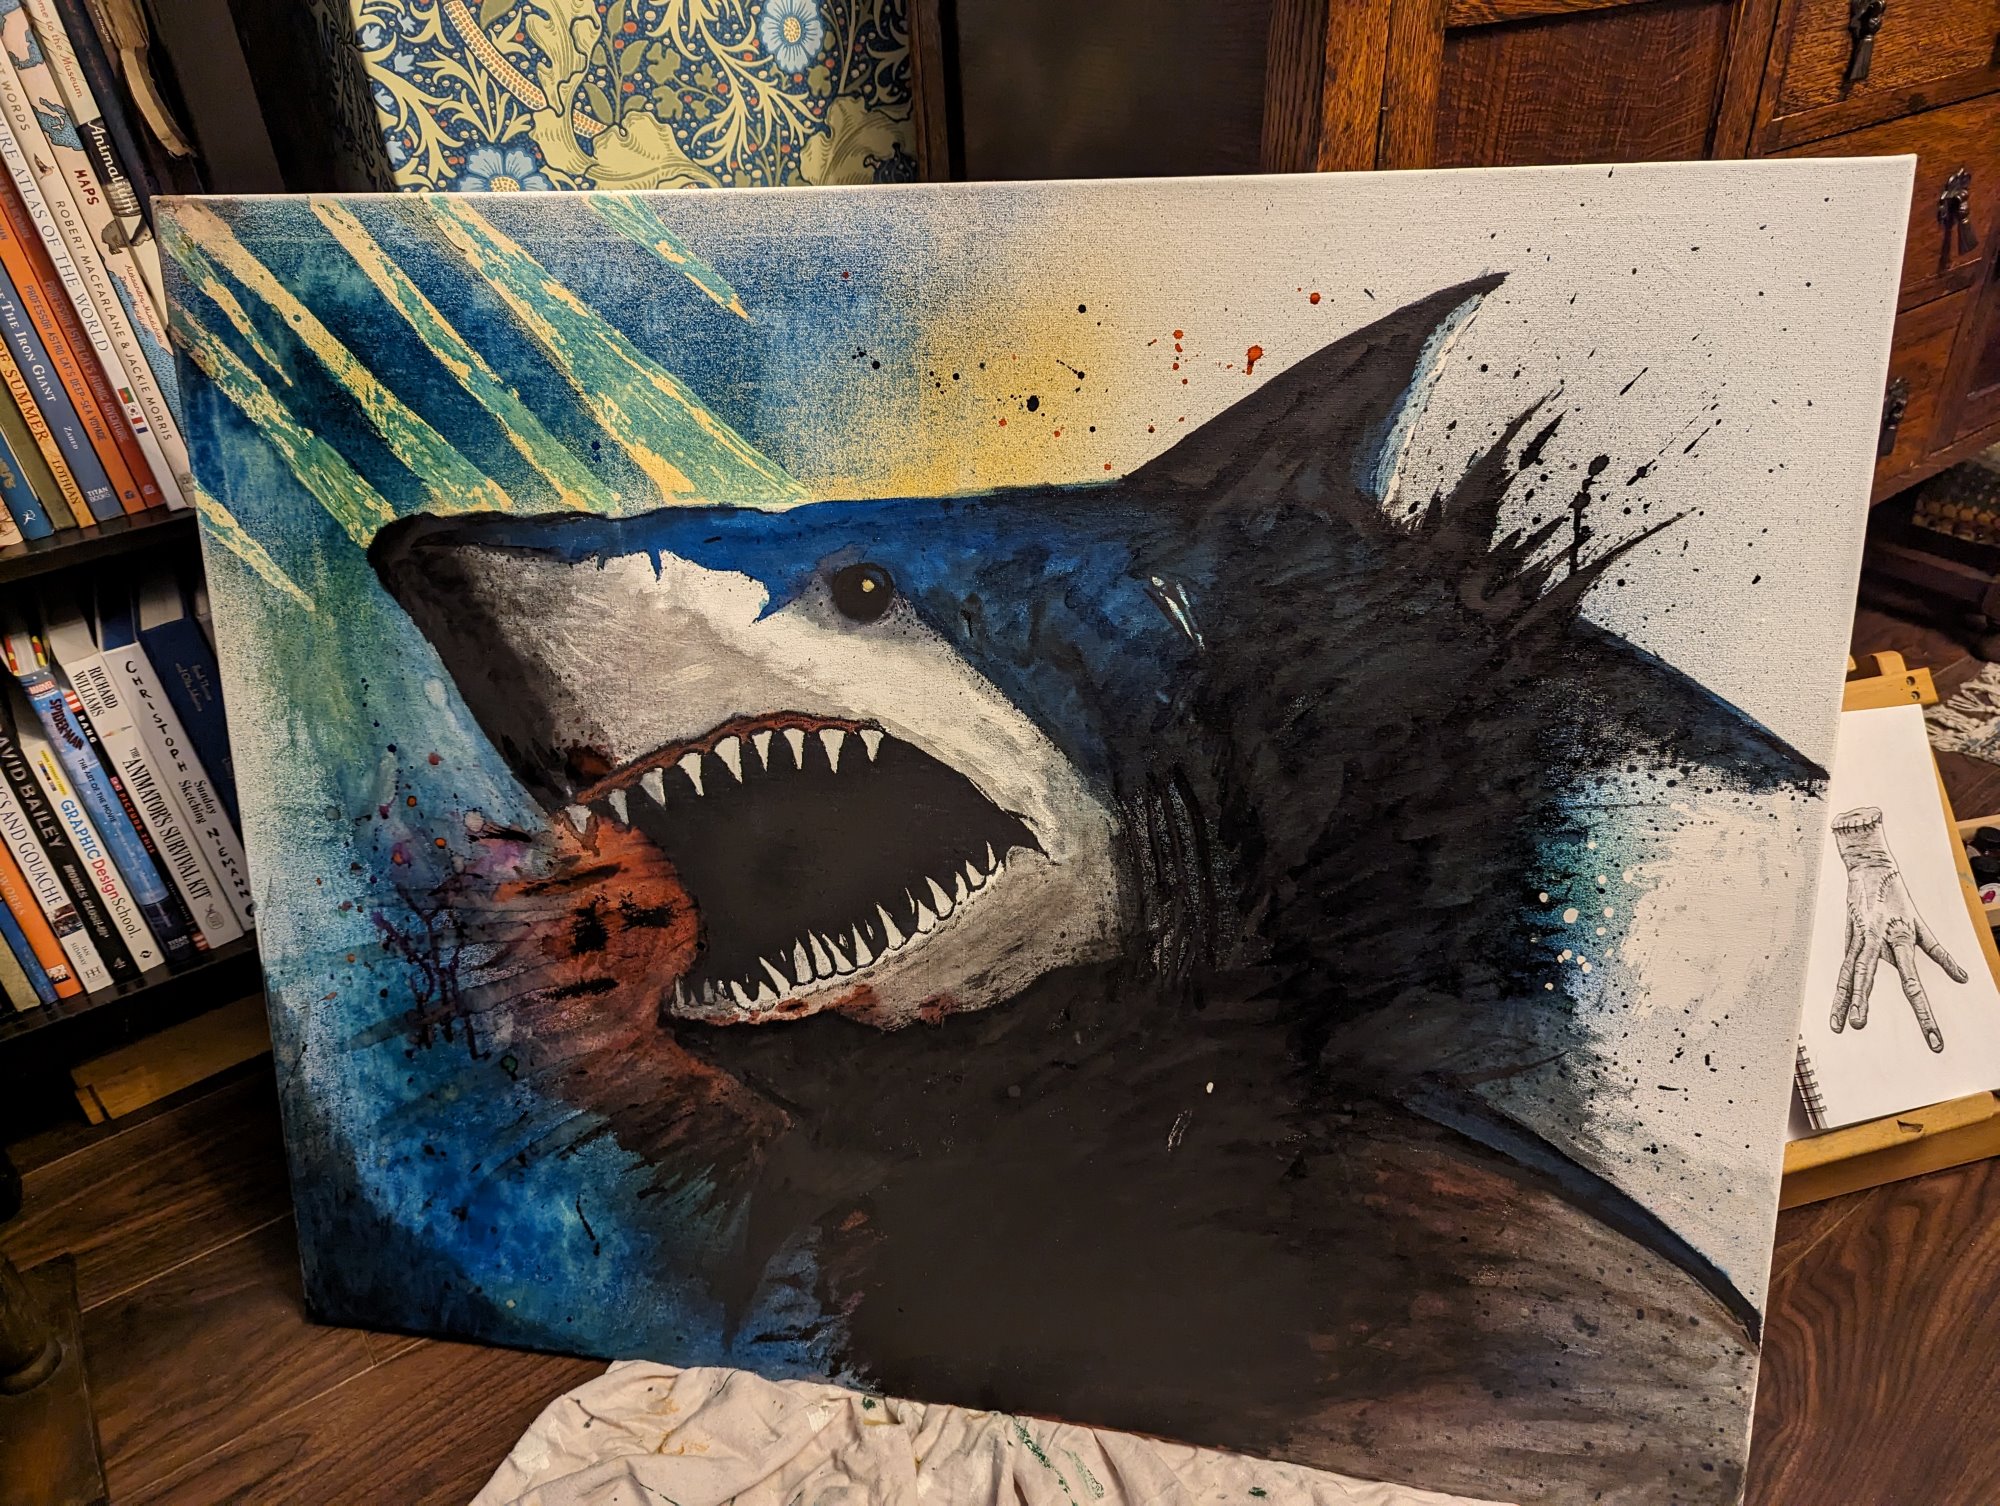 A shark painted with inks on a canvas with it's mouth open and spattered ink everywhere.